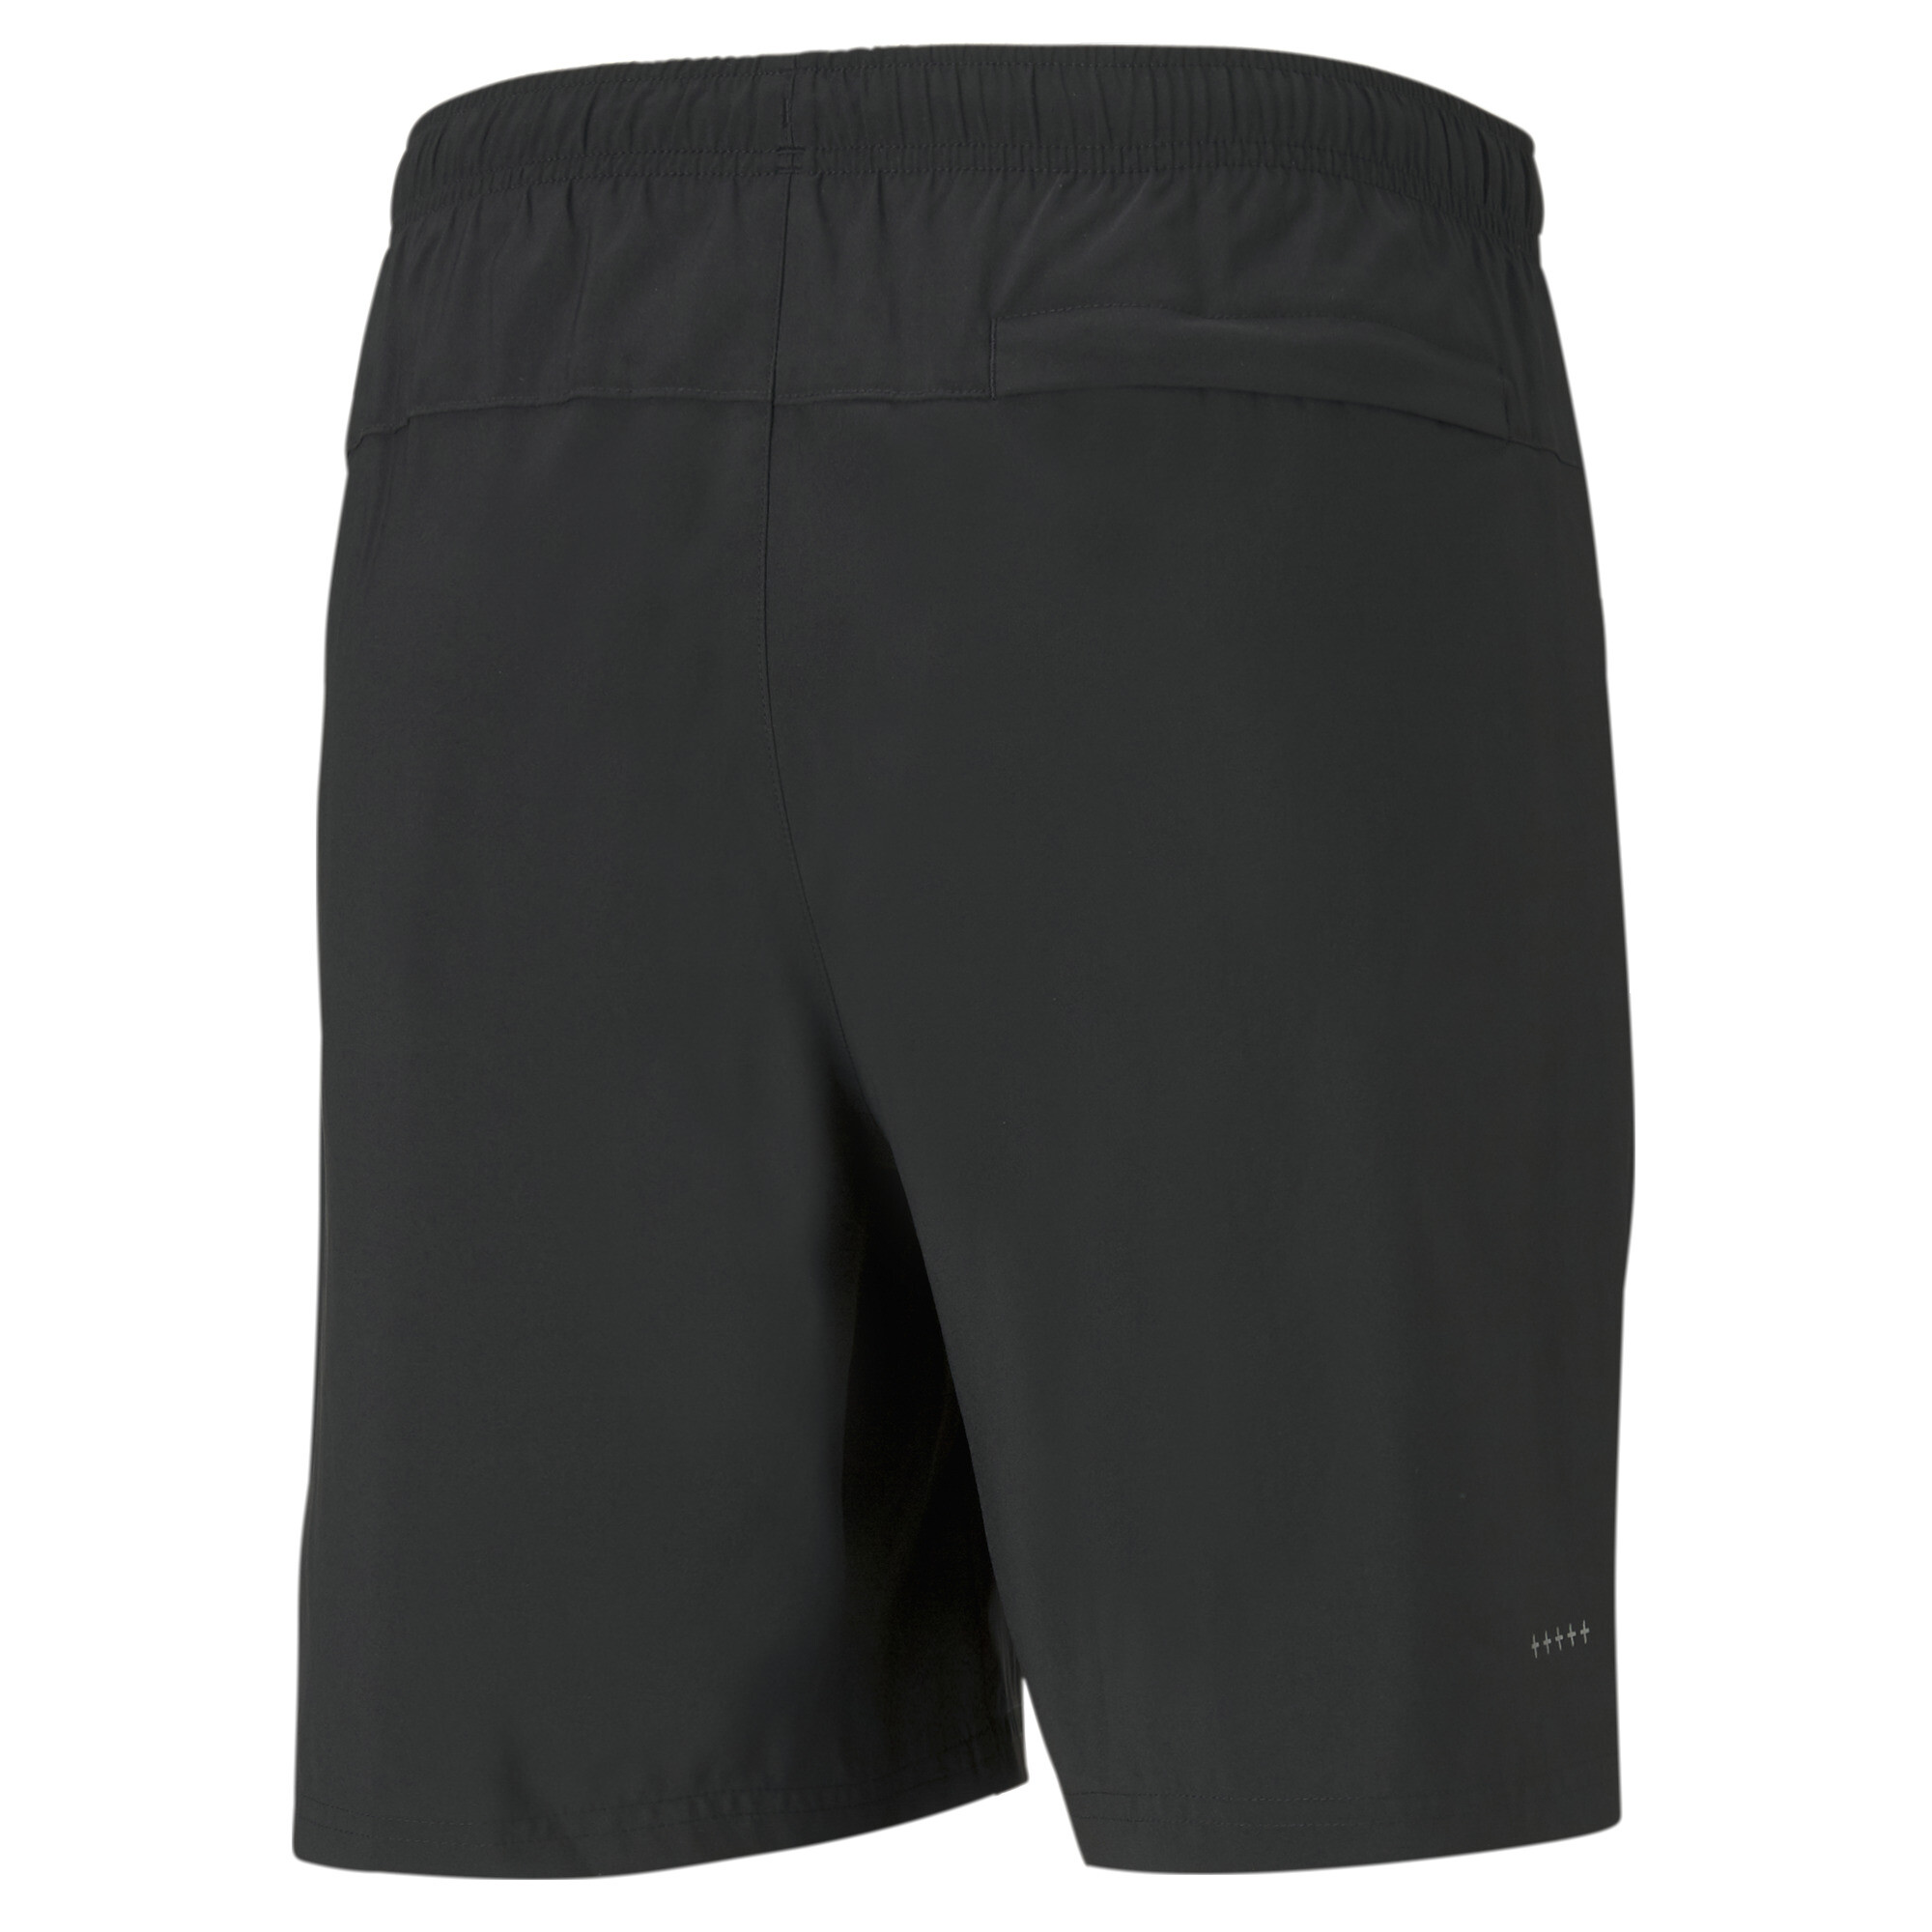 Men's PUMA Favourite Woven 7 Session Running Shorts In Black, Size Small